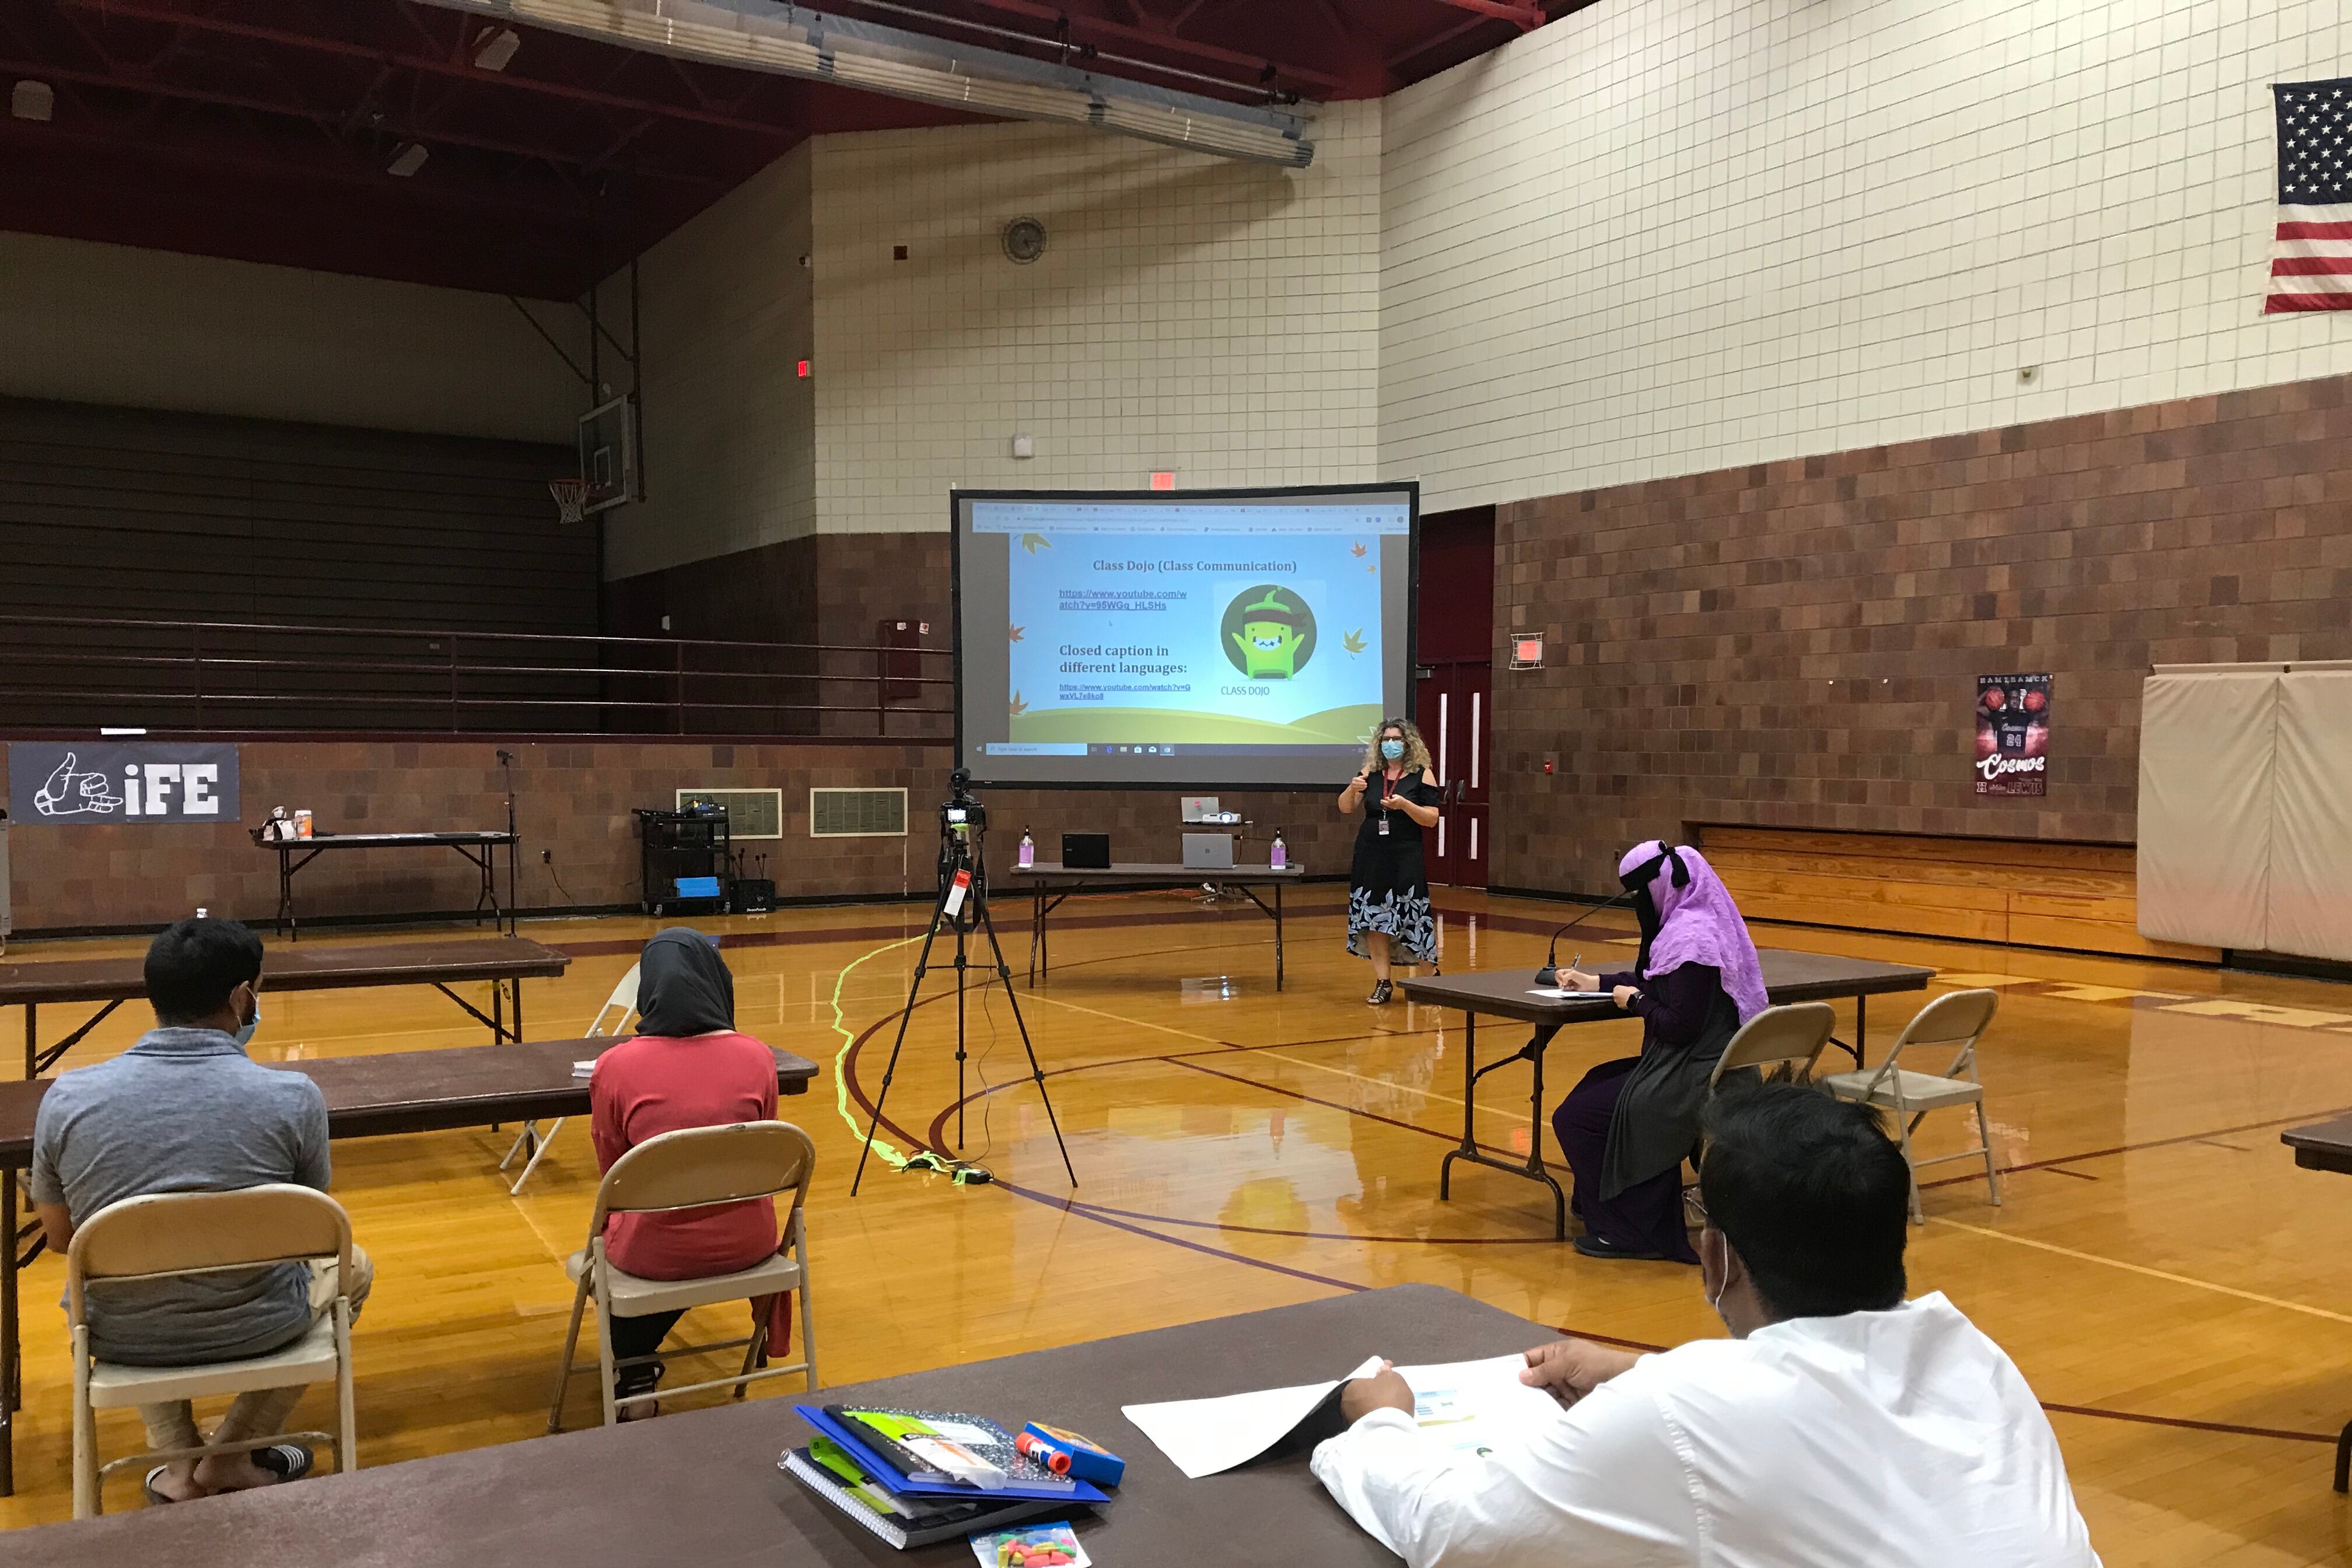 English learners and their parents sit at a social distance in a Hamtramck gym during the coronavirus pandemic to learn about online instruction.